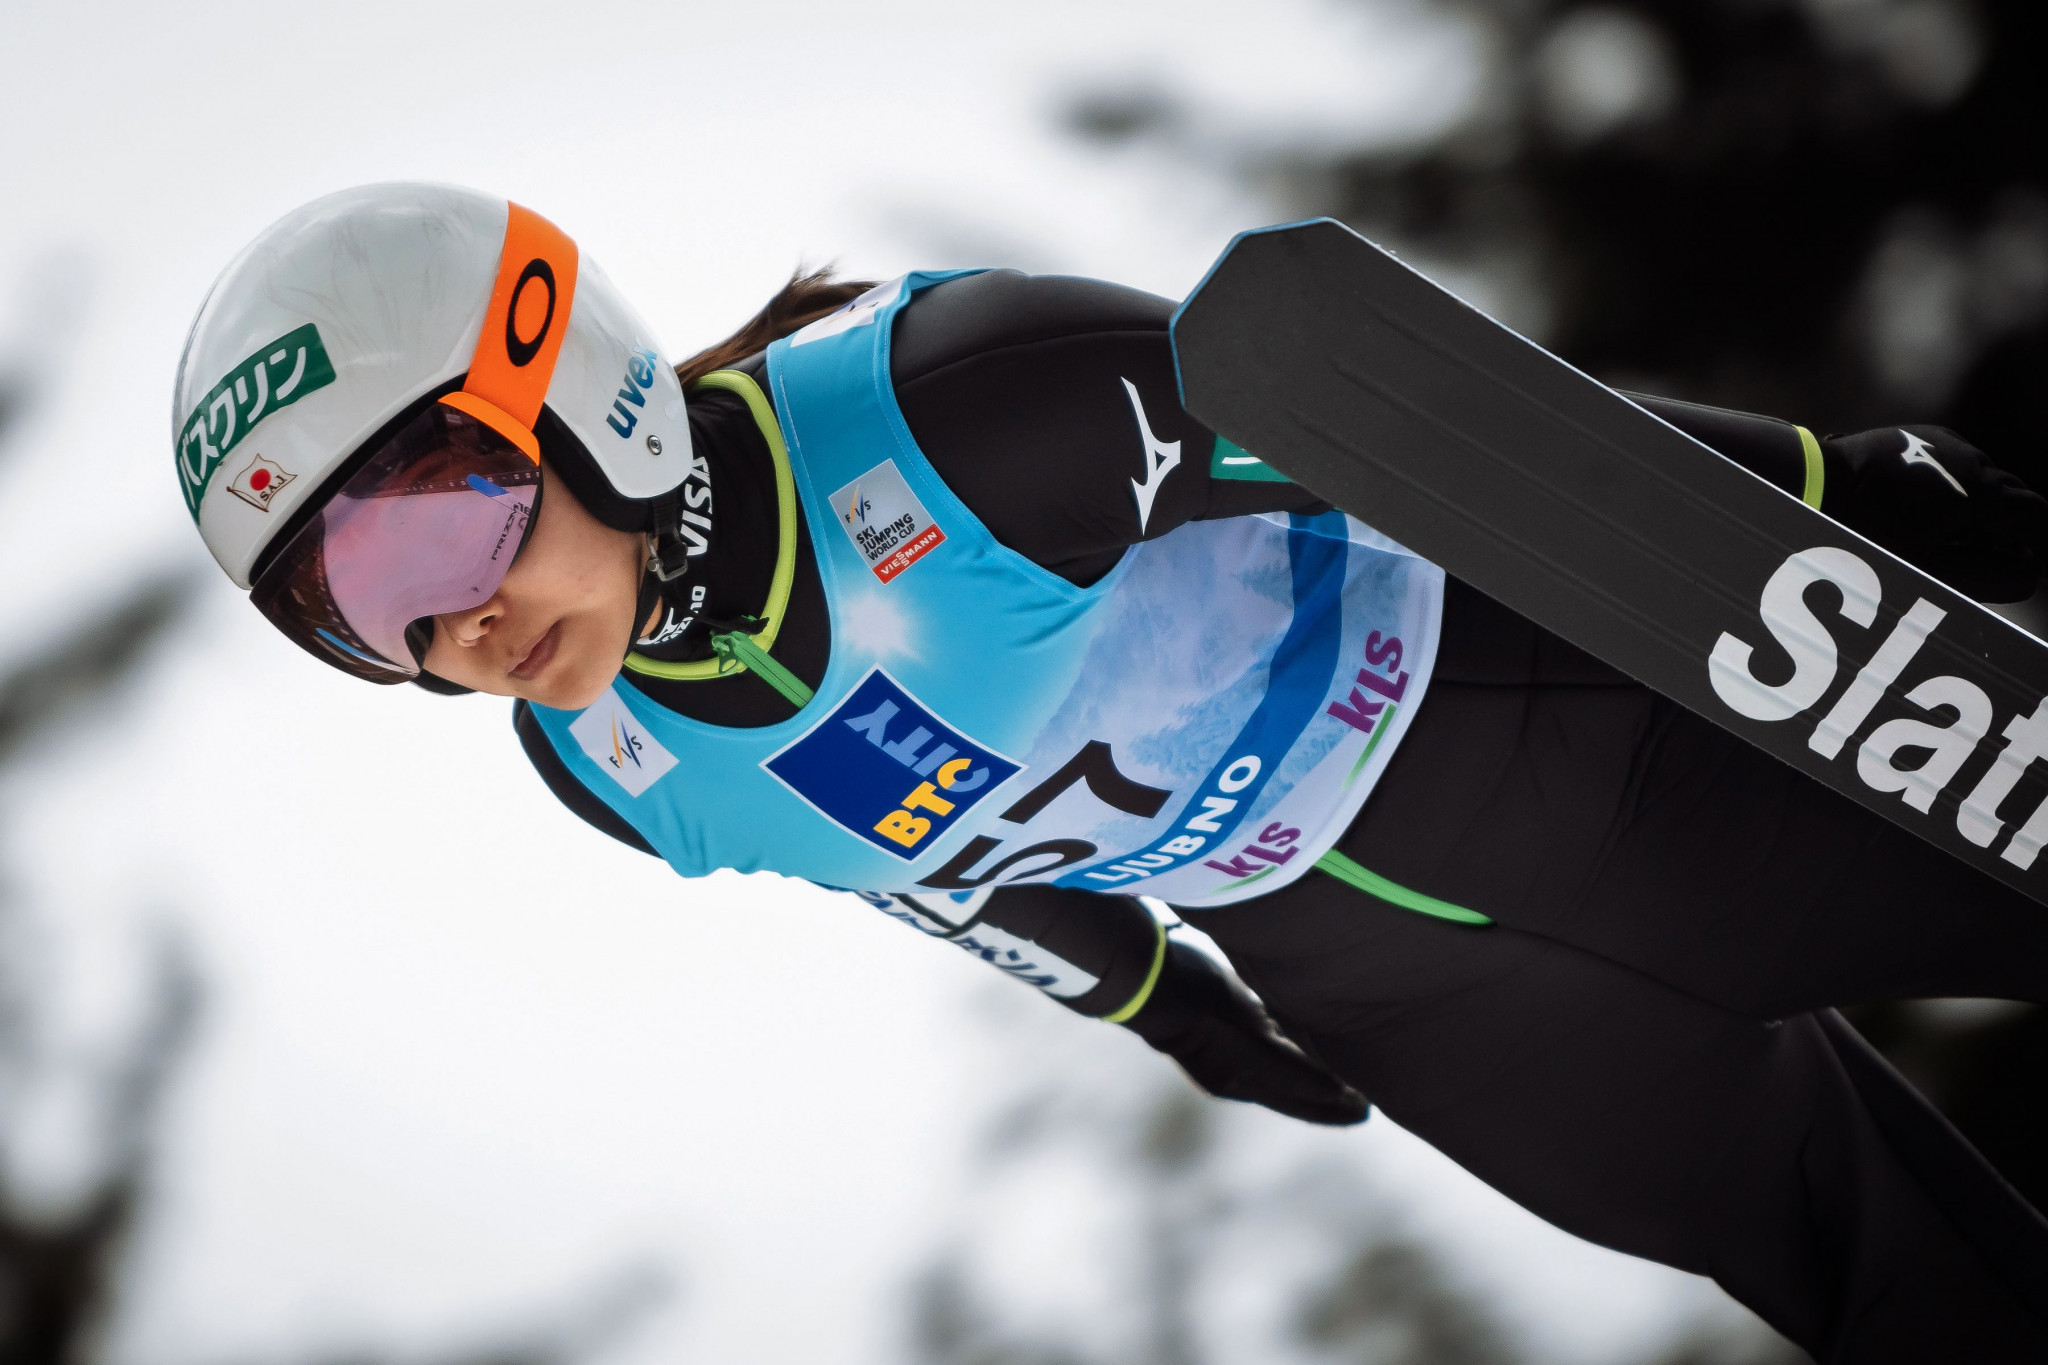 Japan's Sara Takanashi ended Olympic champion Maren Lundby's run of dominance in the FIS Ski Jumping World Cup with victory in Ljubno today ©Getty Images